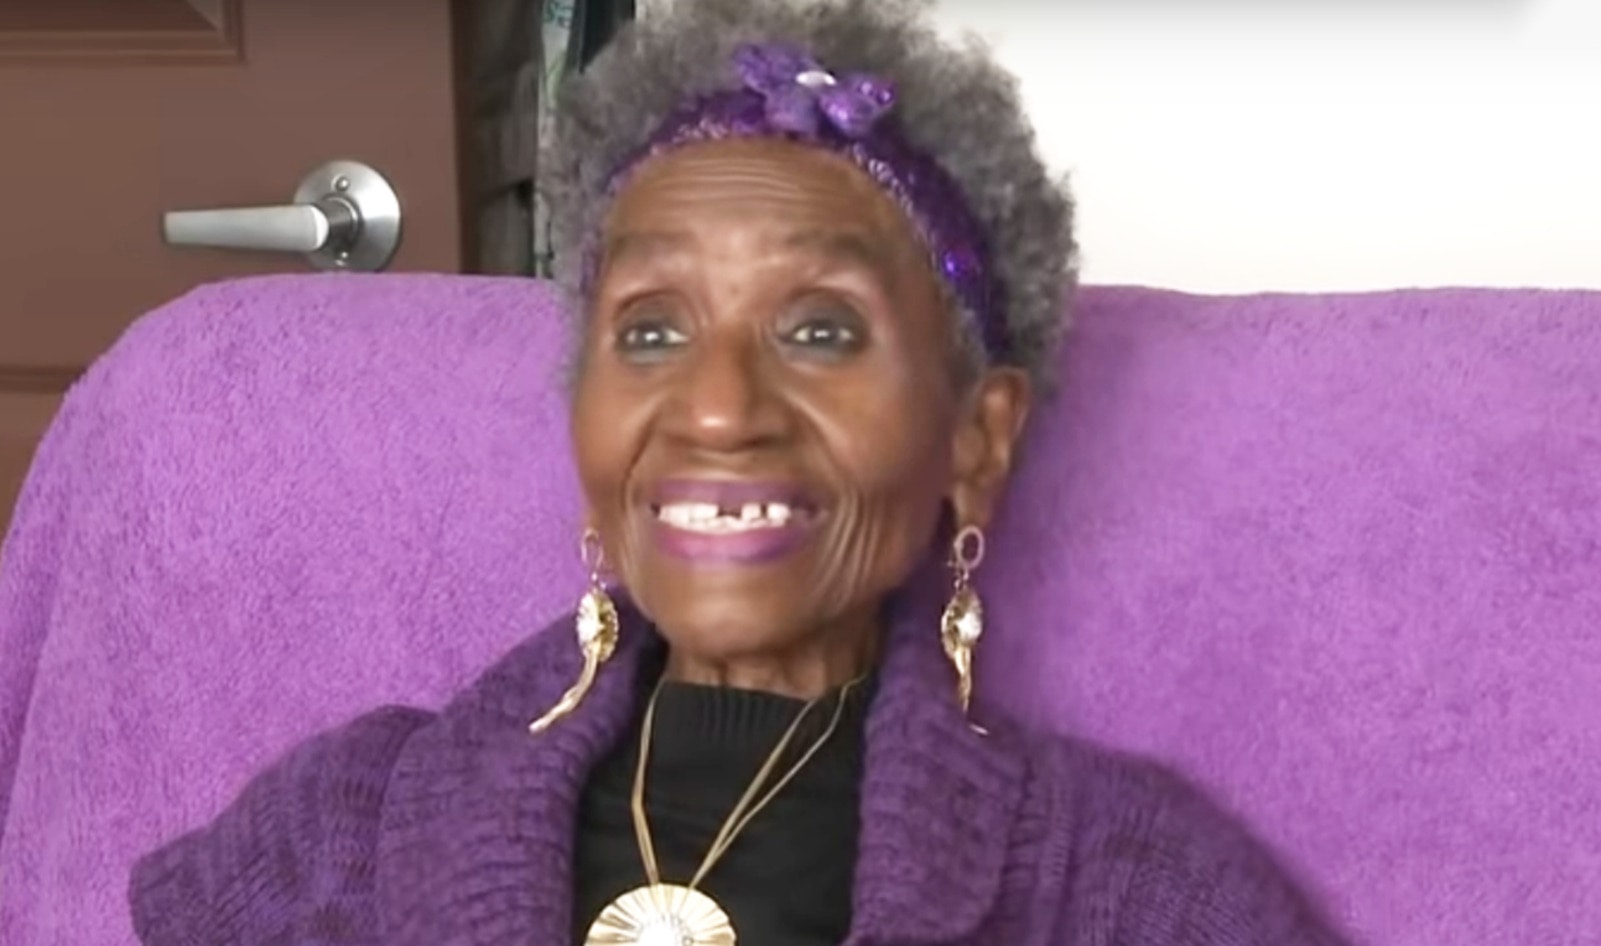 86-Year-Old Jessica Slaughter Beats Lifelong Obesity by Going Vegan